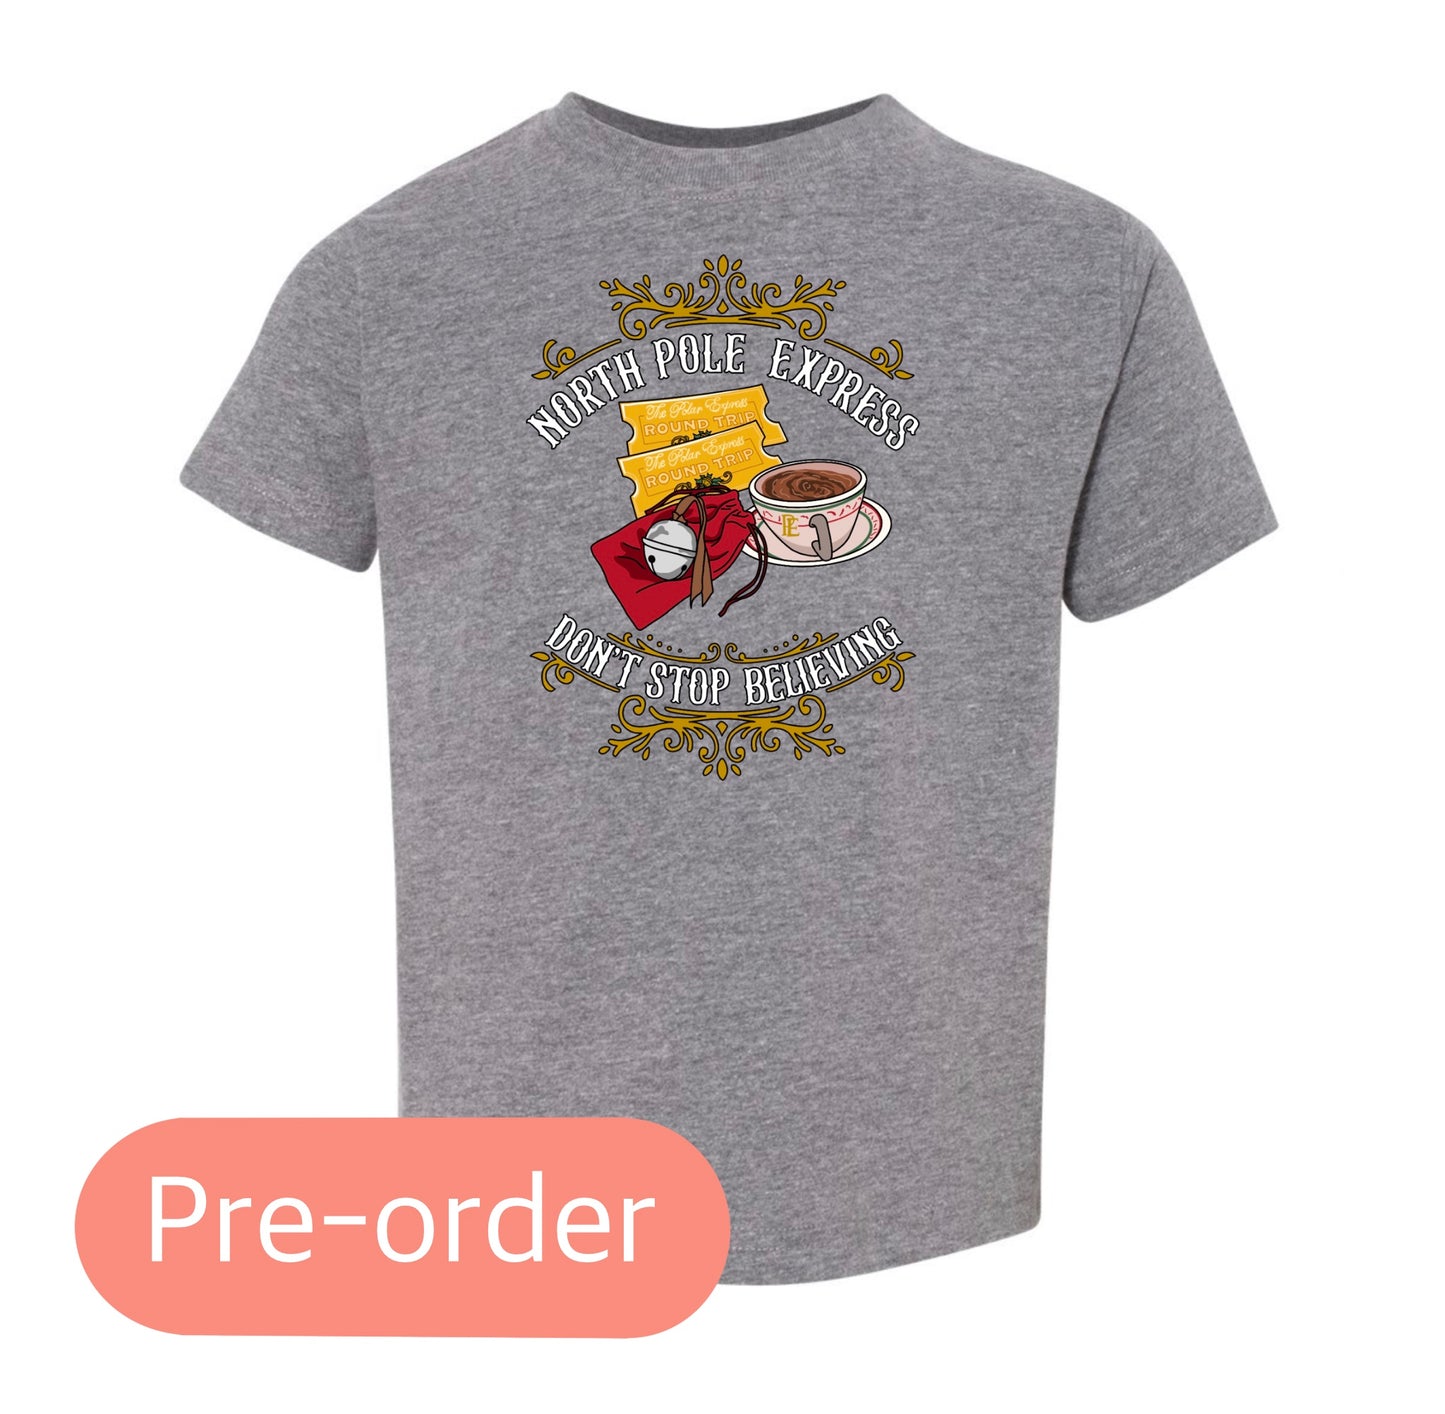 North Pole Express Kids' Tee (Pre-Order)